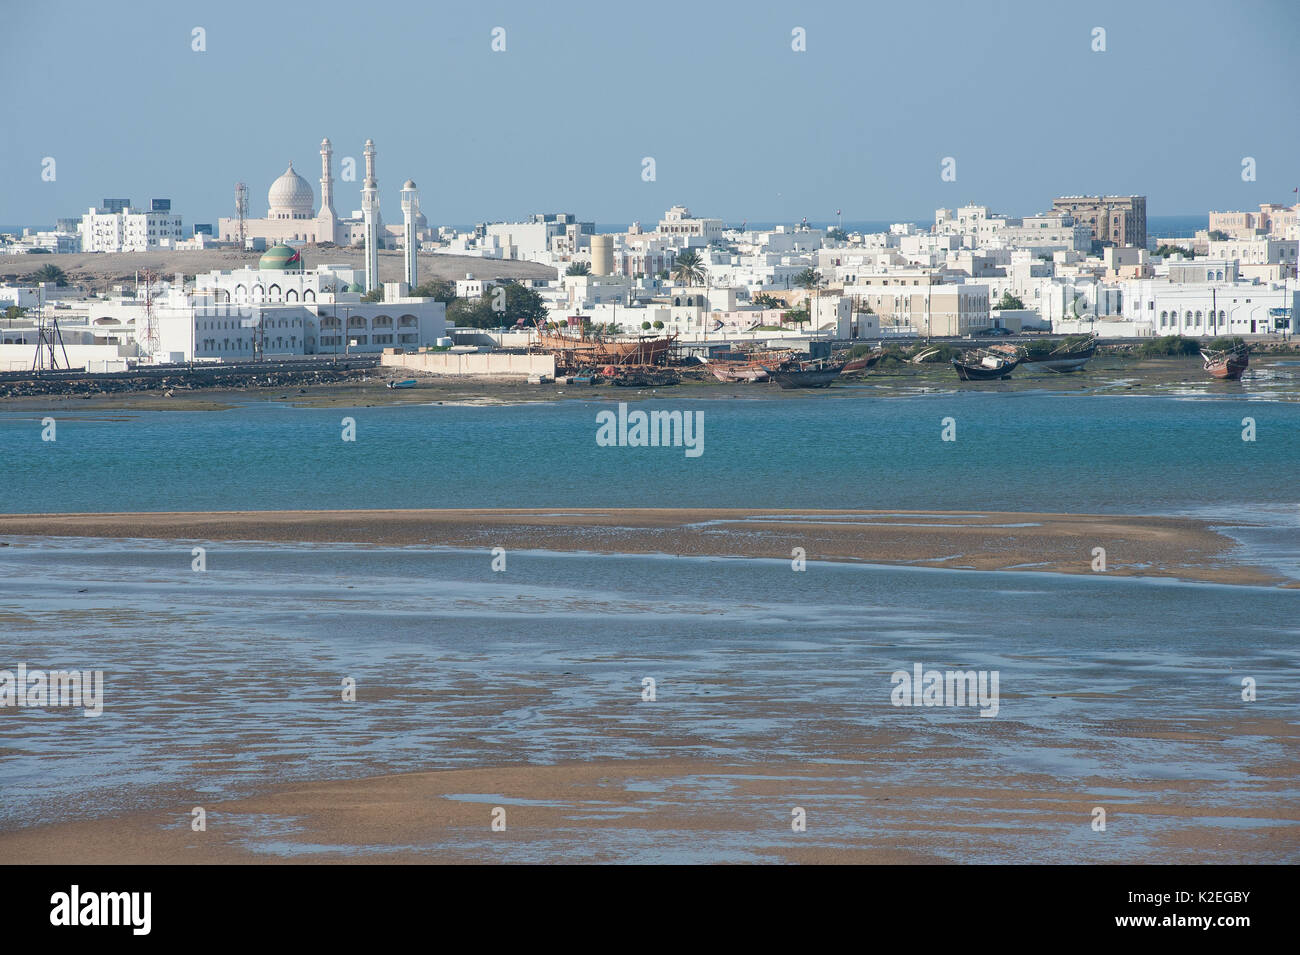 Sur, a city at the coast of Oman, with tidal mudflats, sand banks and traditional boats, Sultanate of Oman, February. Stock Photo